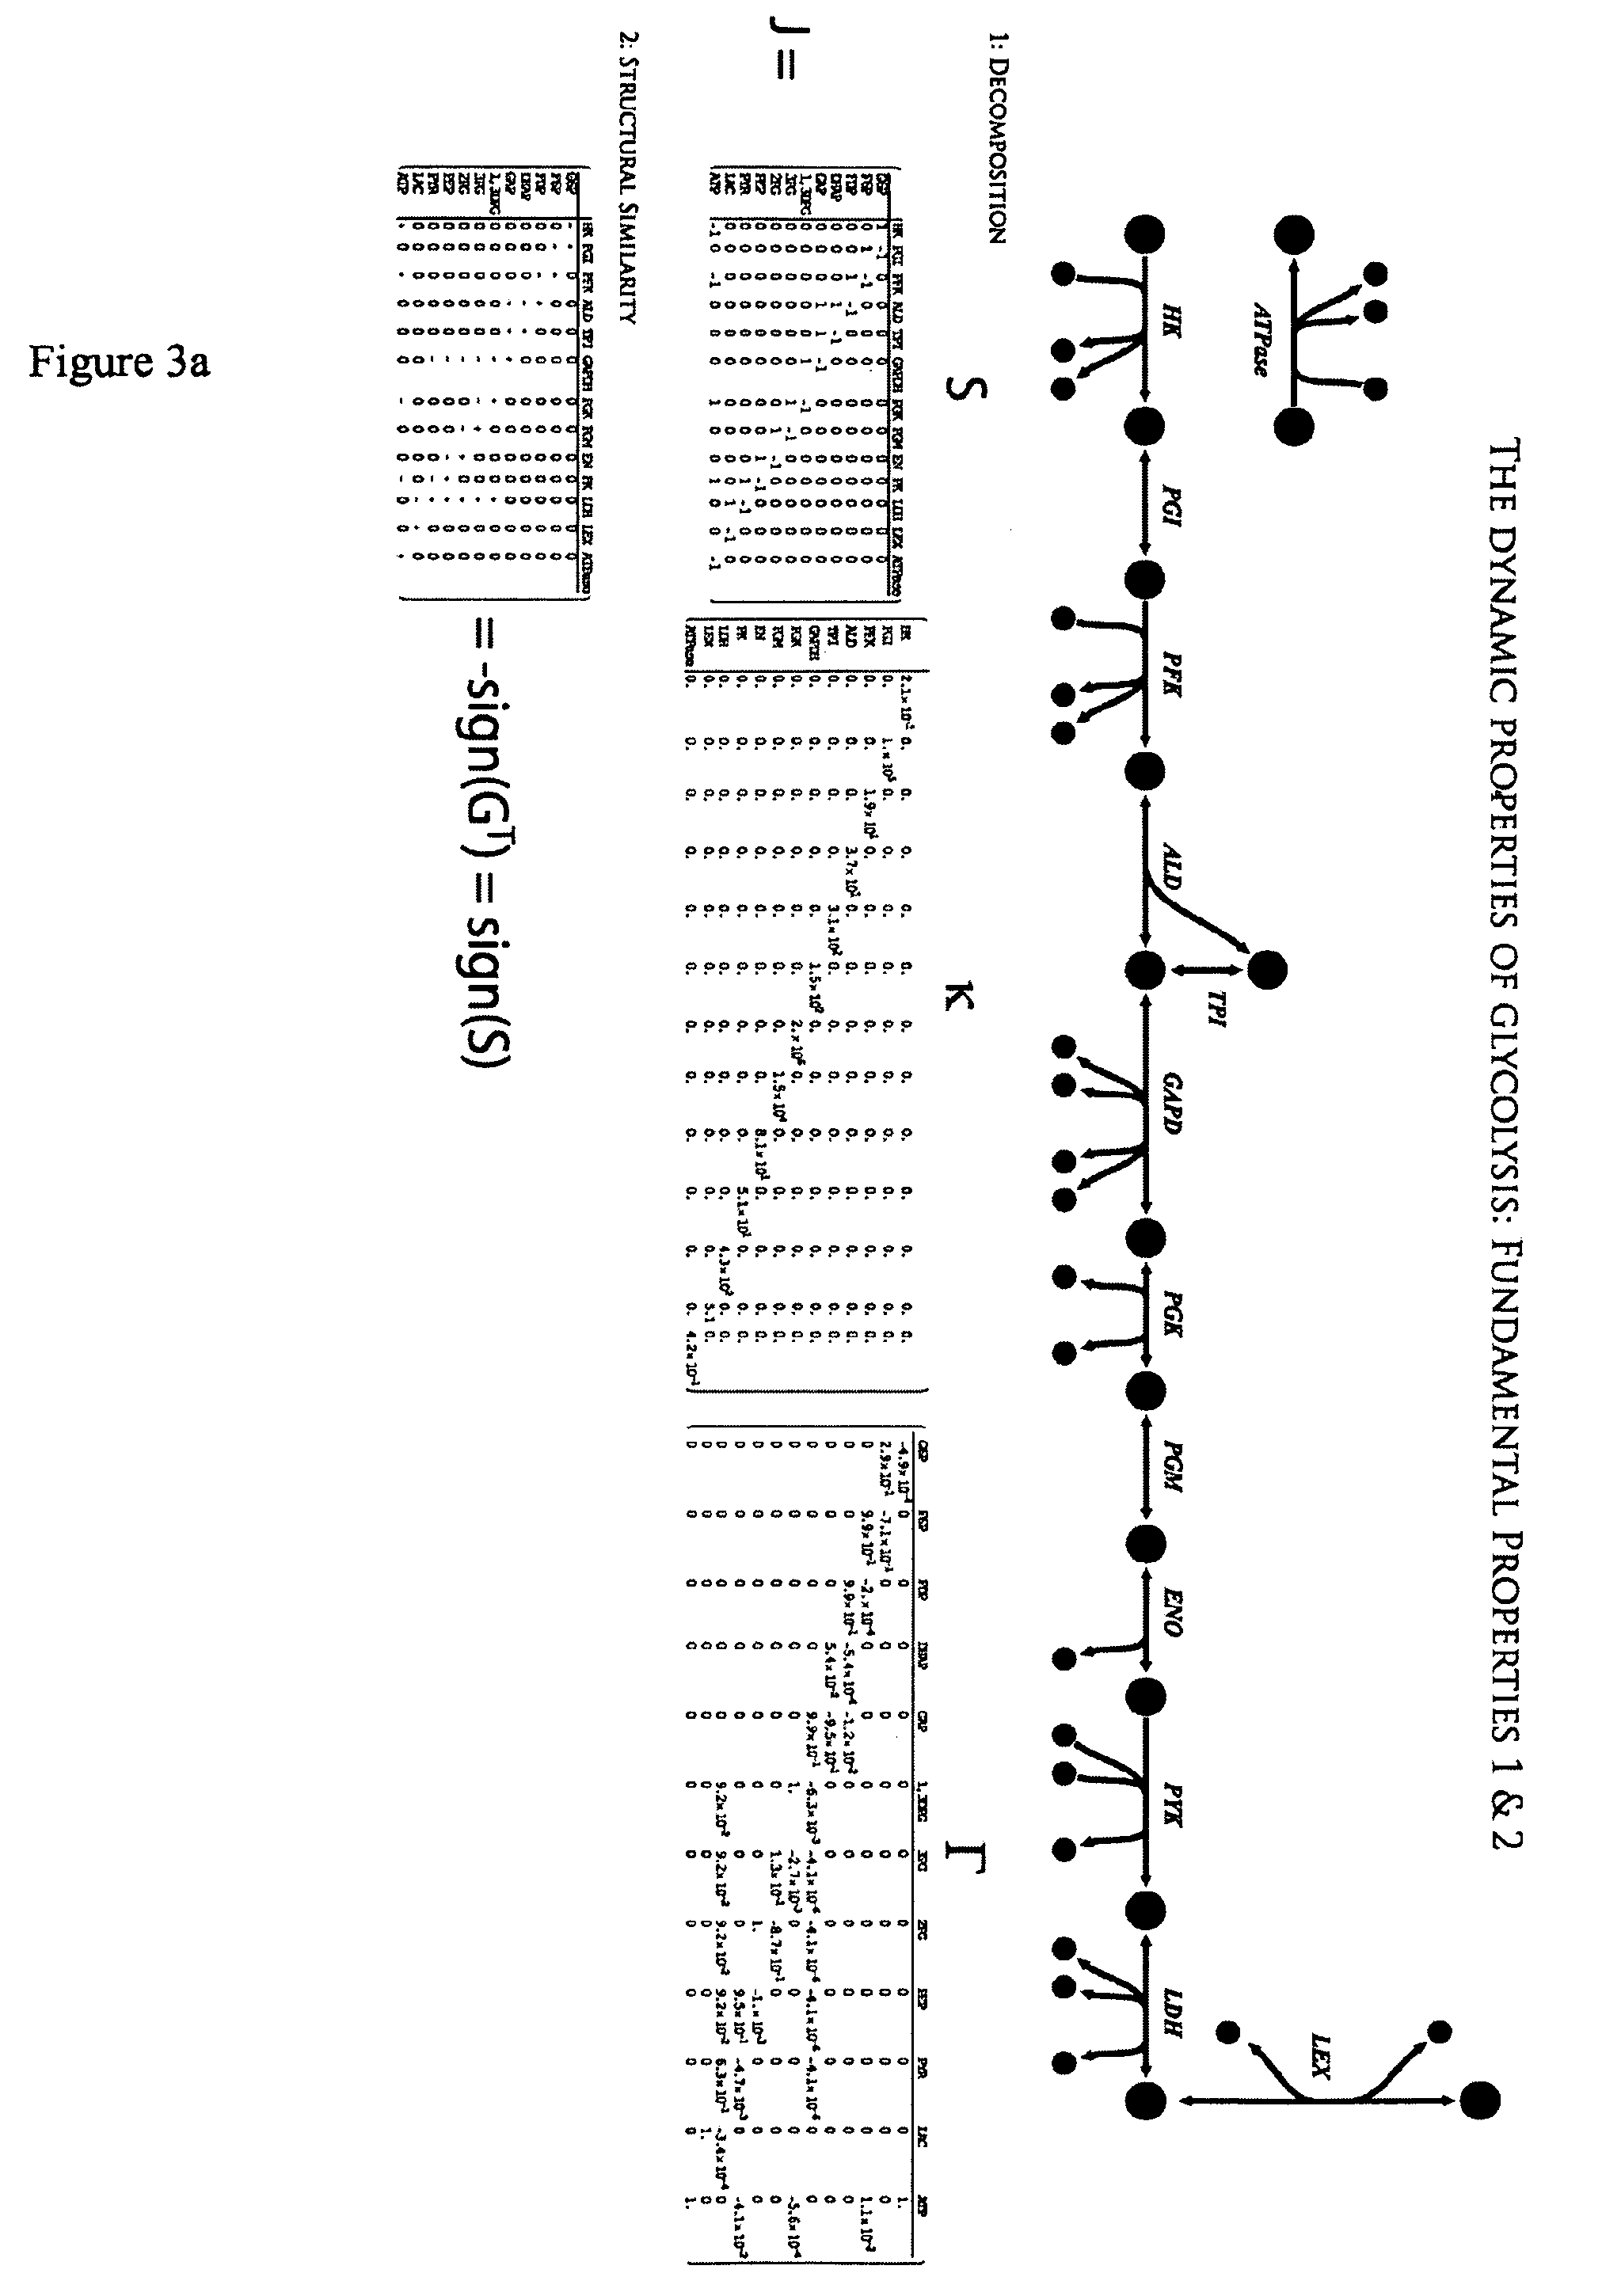 Methods and systems for genome-scale kinetic modeling